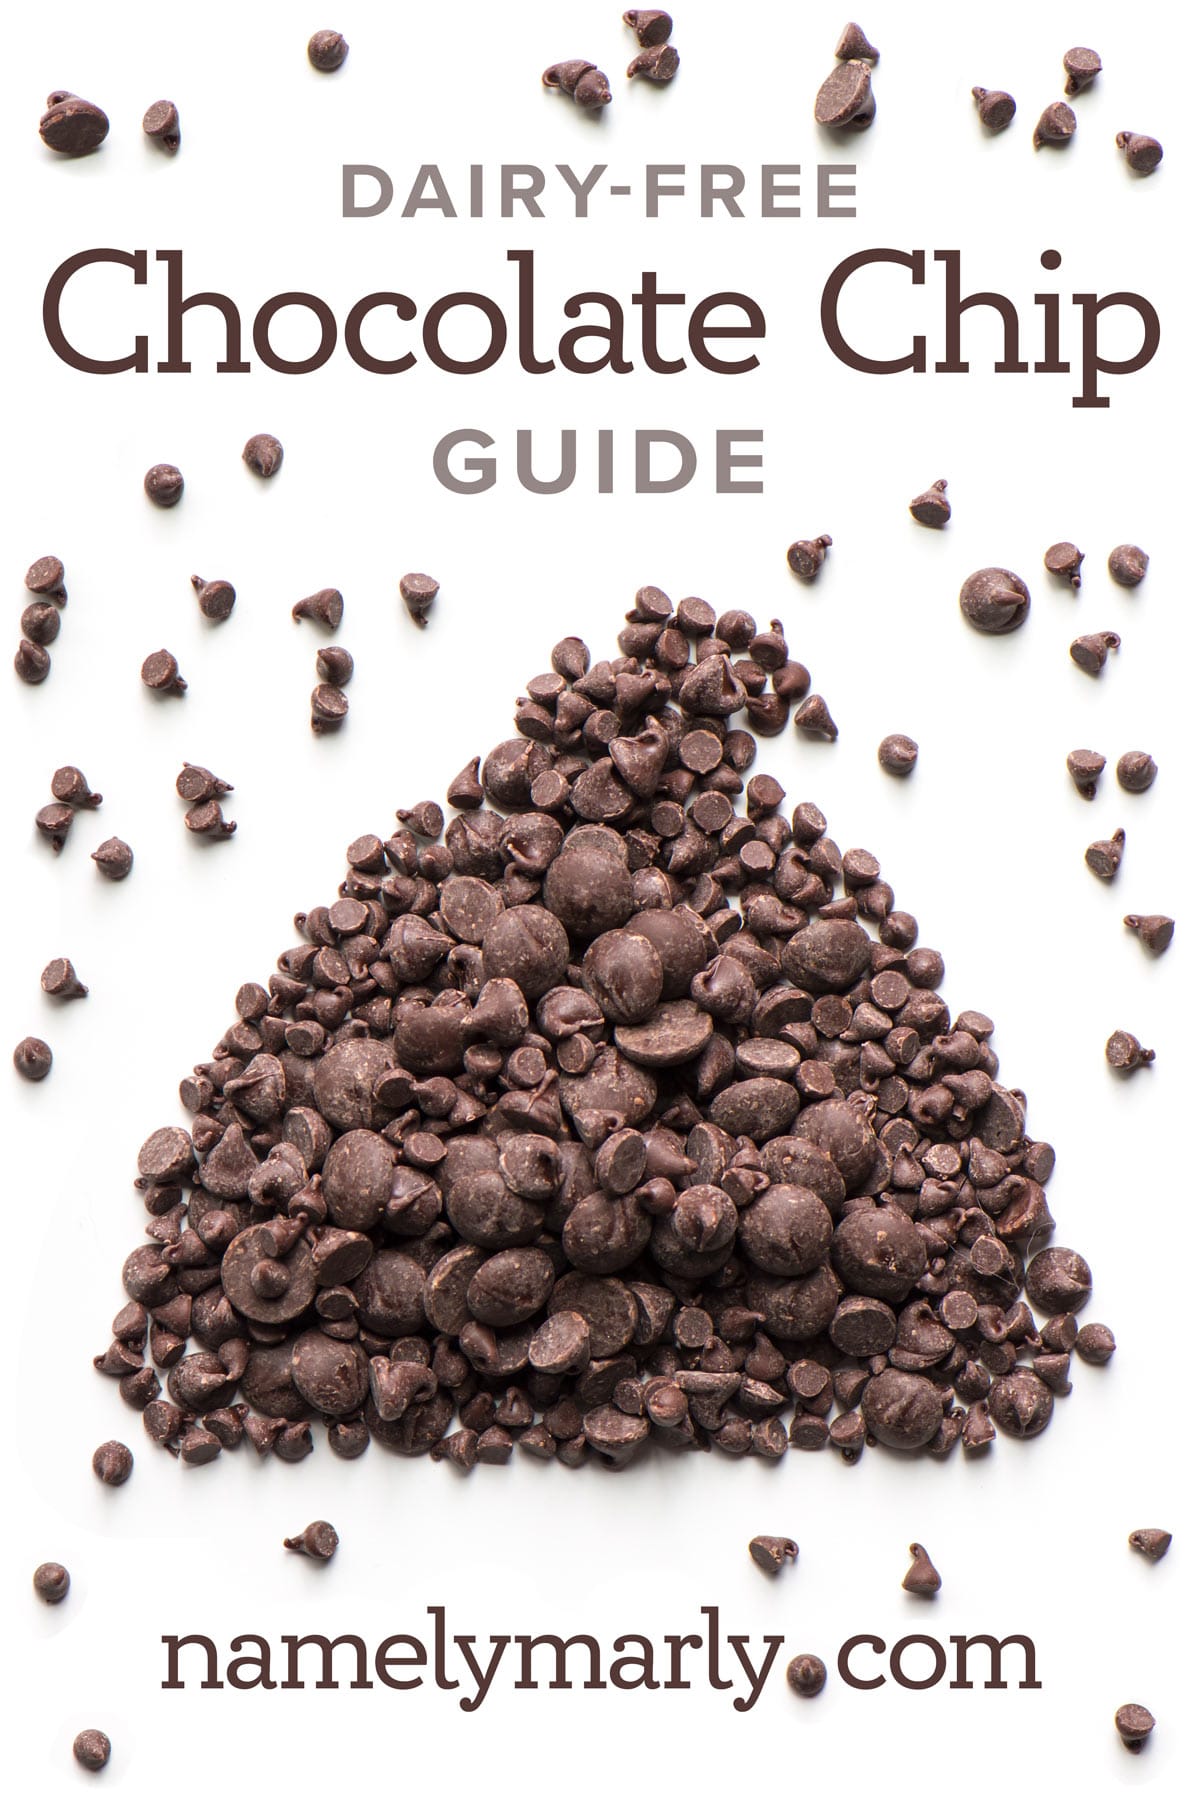 Overhead view of a pile of chocolate chips with text that reads: Dairy-Free Chocolate Chip Guide by namelymarly.com